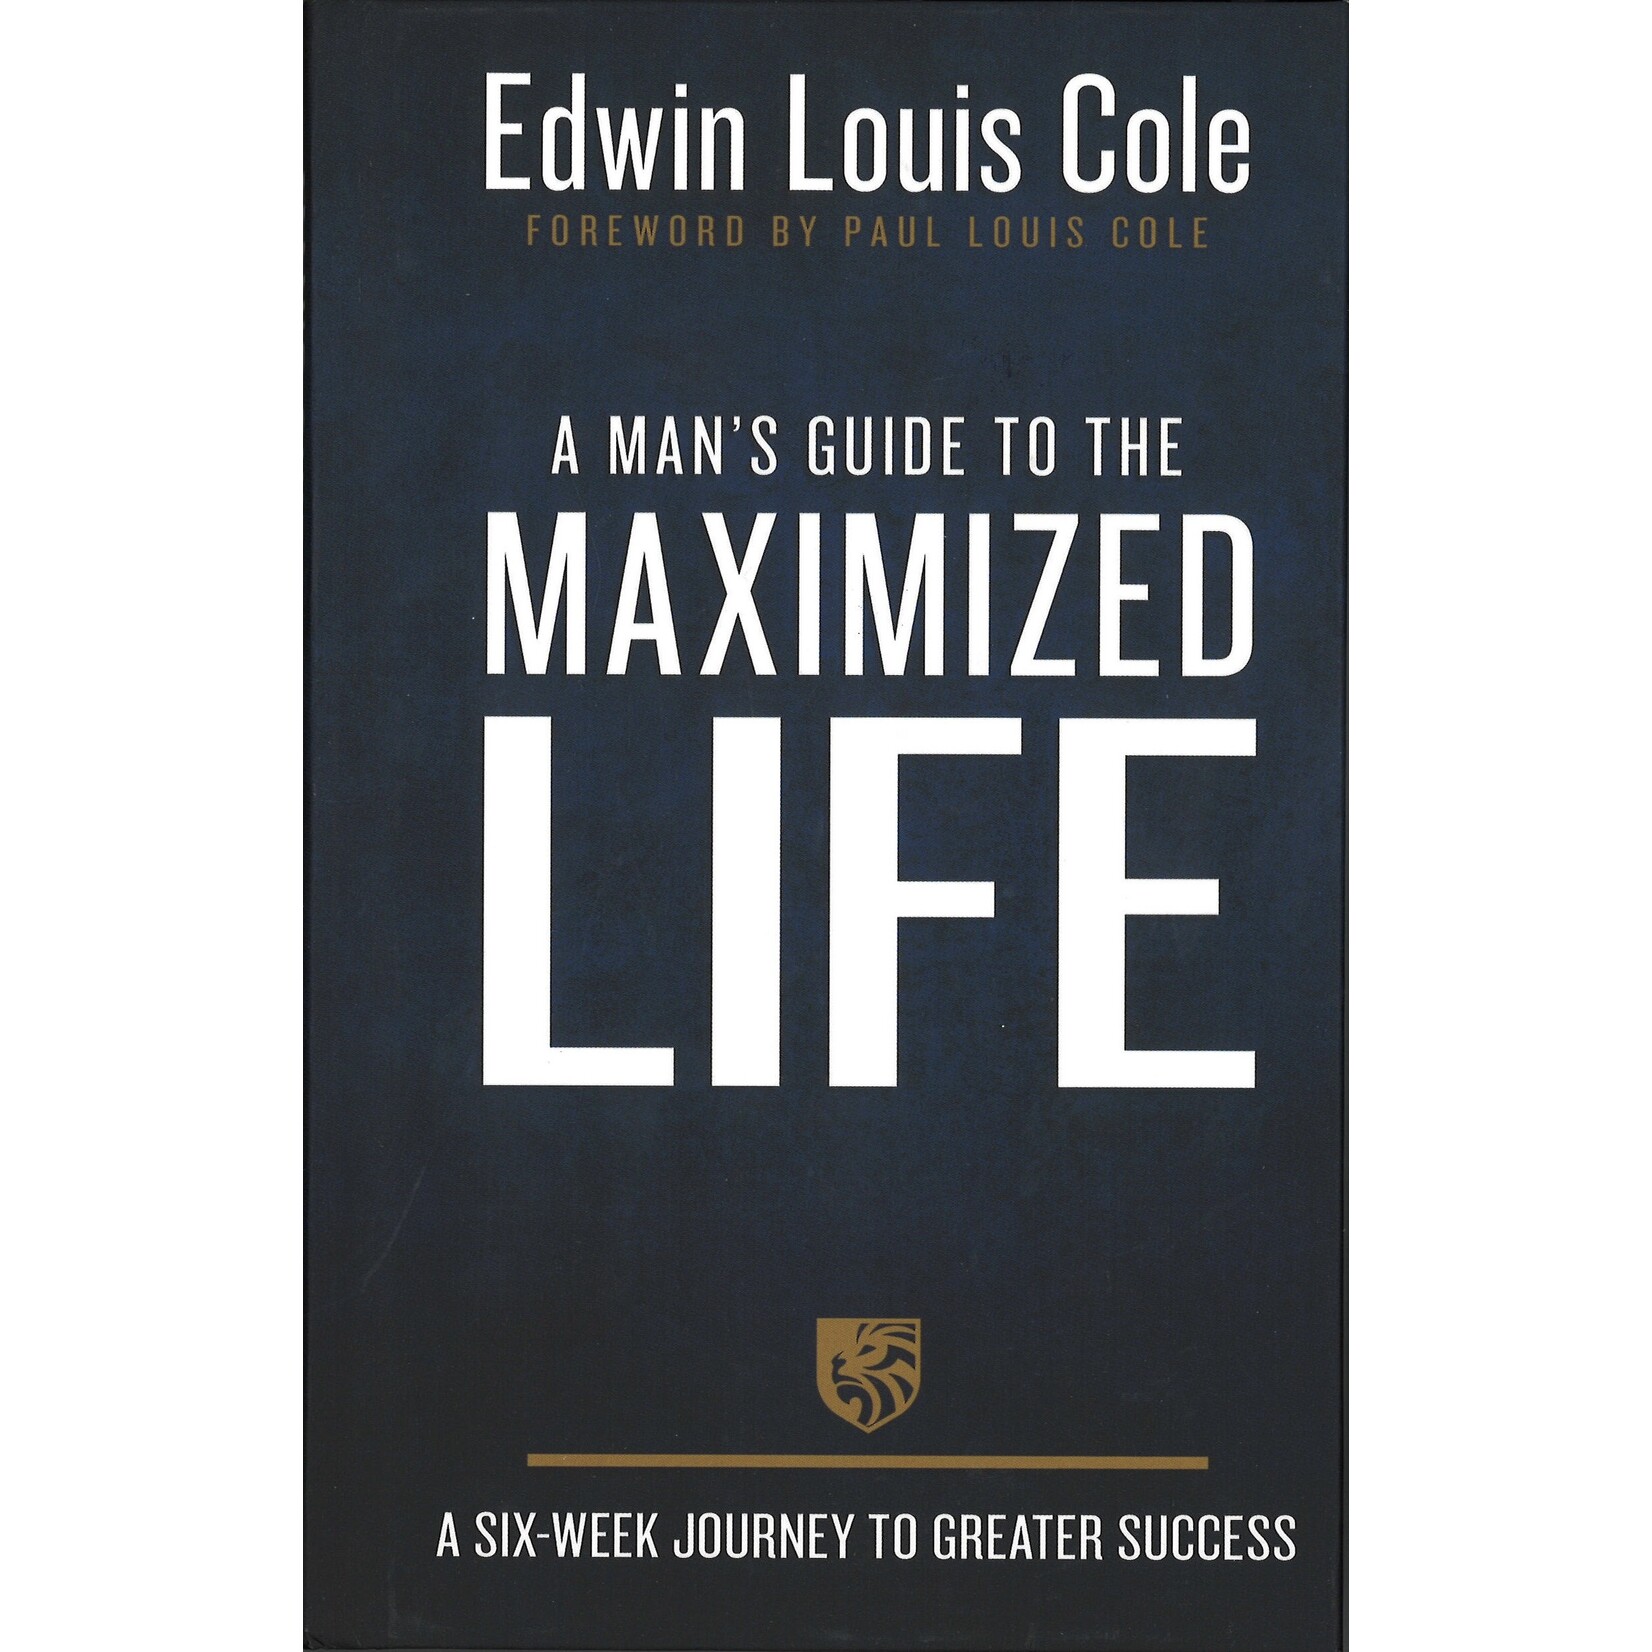 A MAN'S GUIDE TO THE MAXIMIZED LIFE: 6 WK JOURNEY